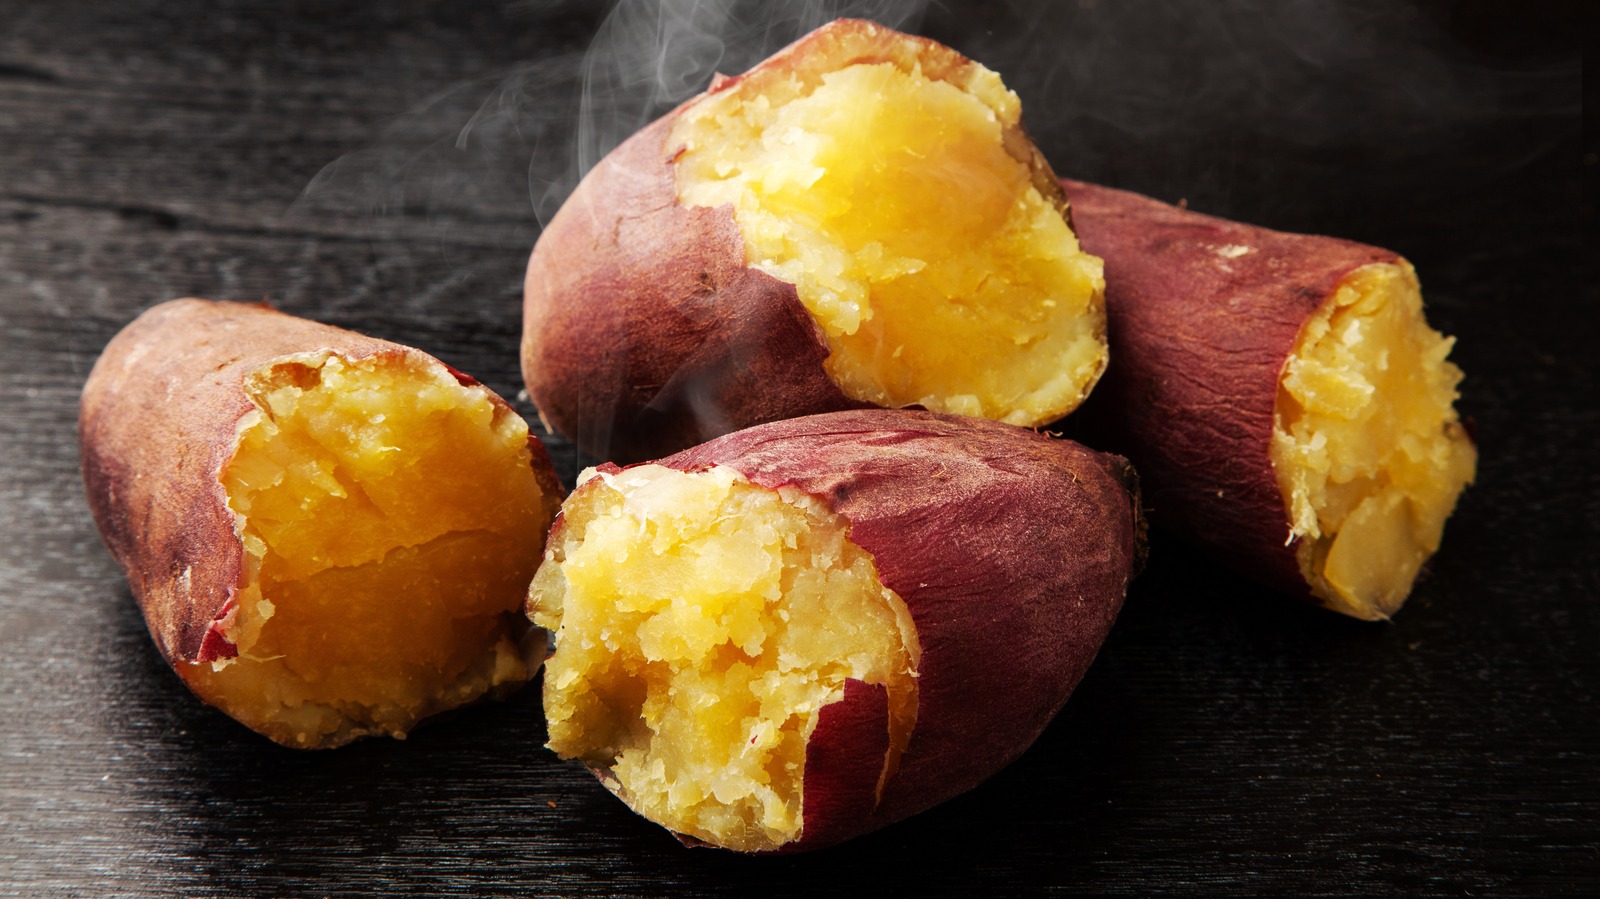 What Makes Japanese Sweet Potatoes Different From The American Variety